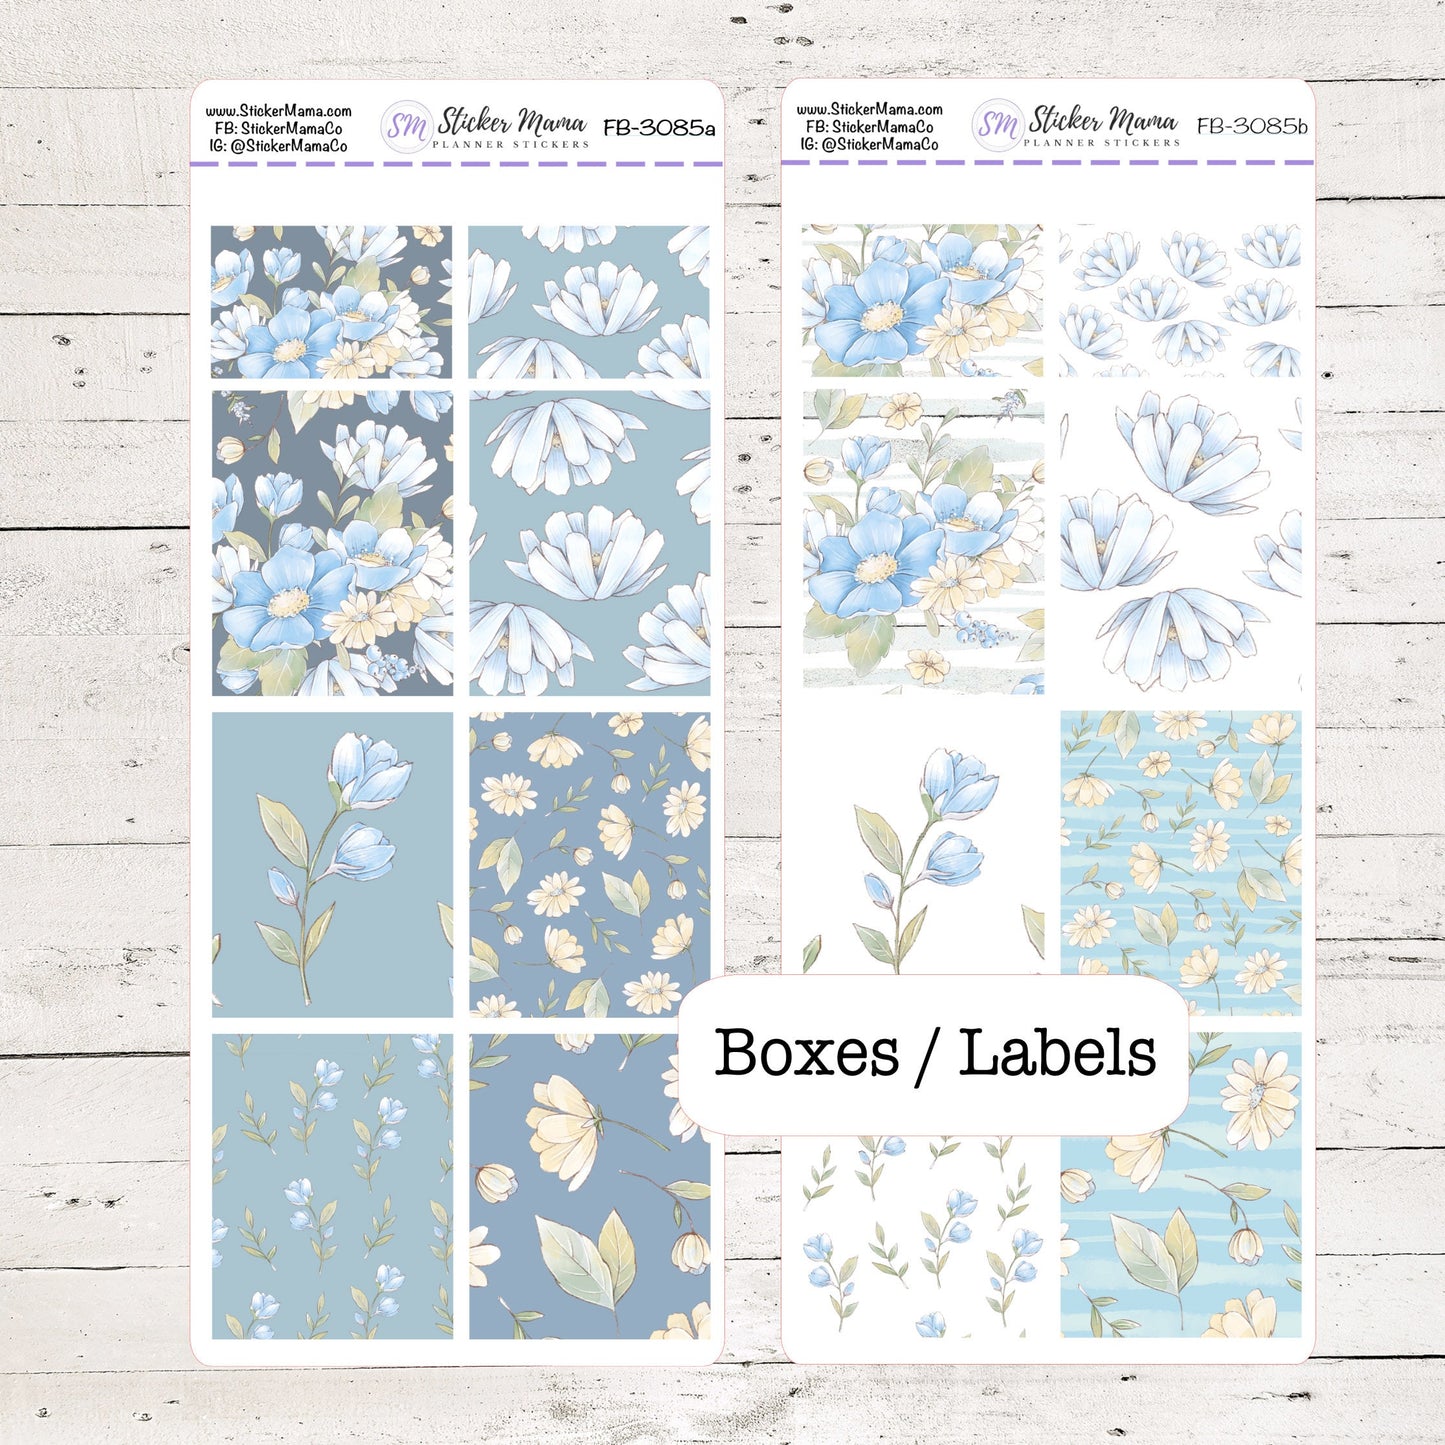 FB-3085 - FULL BOX Stickers - August Delicate Blue Flowers - Planner Stickers - Full Box for Planners